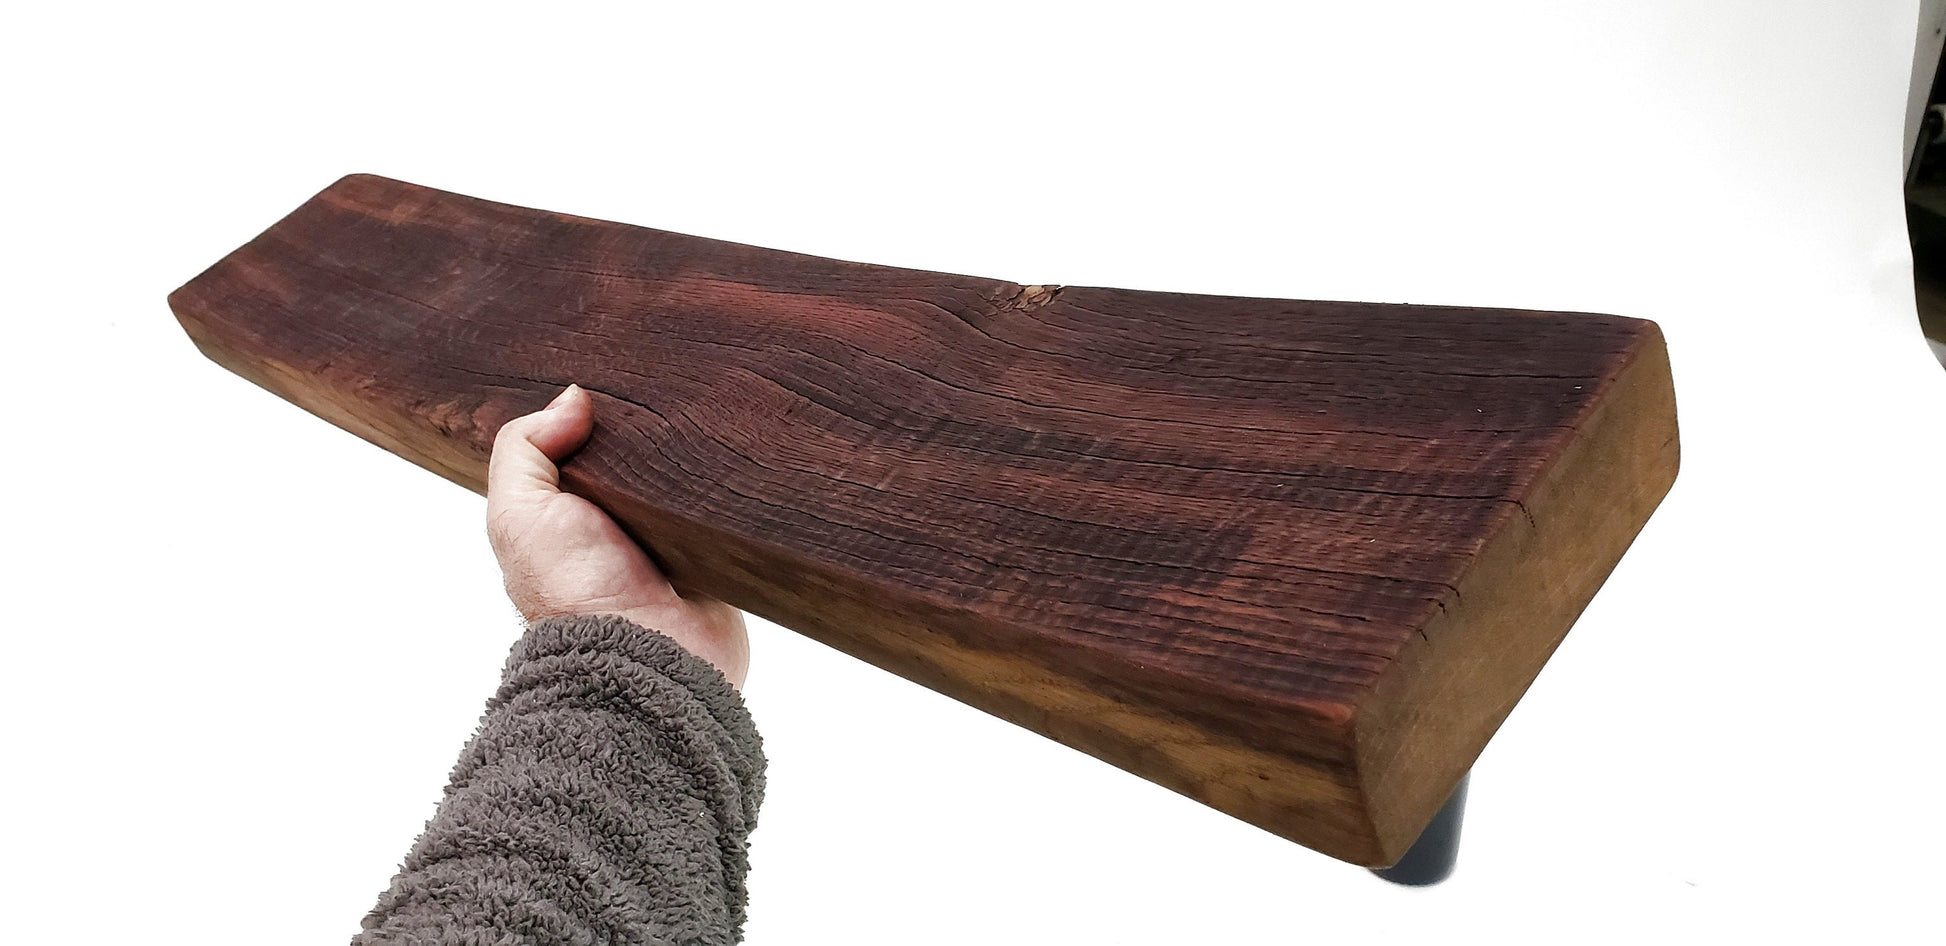 Wine barrel cutting / chopping / serving board "Komad" - made from reclaimed Napa wine barrels - Individually numbered - 100% Recycled!